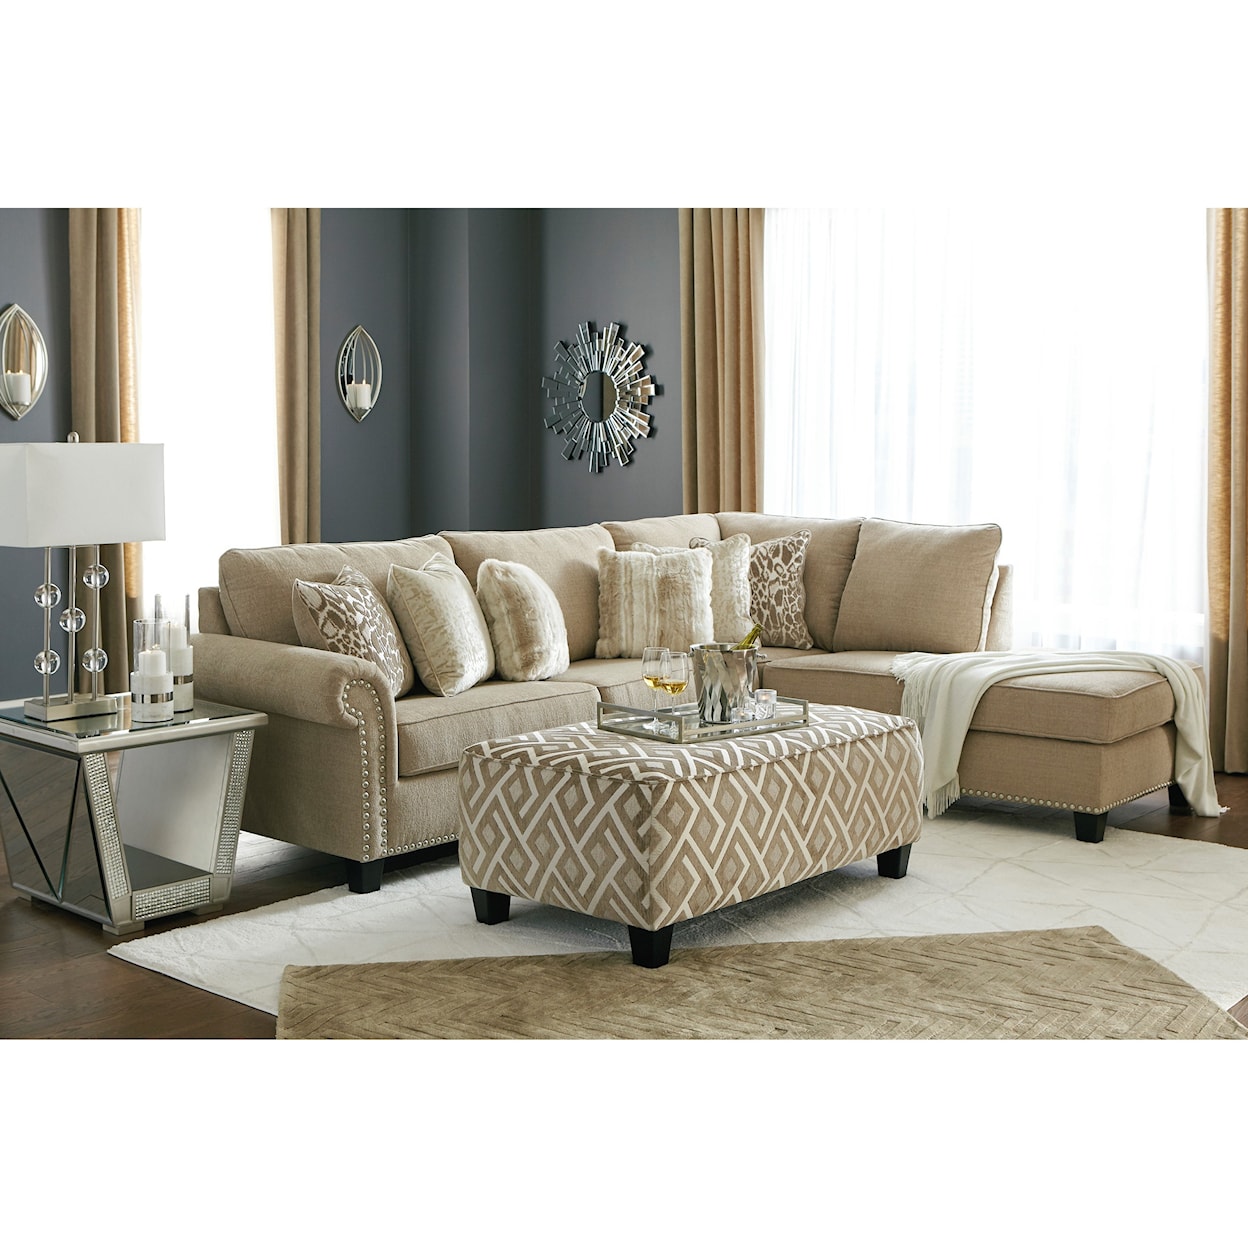 Signature Design by Ashley Dovemont 2pc Sectional and ottoman